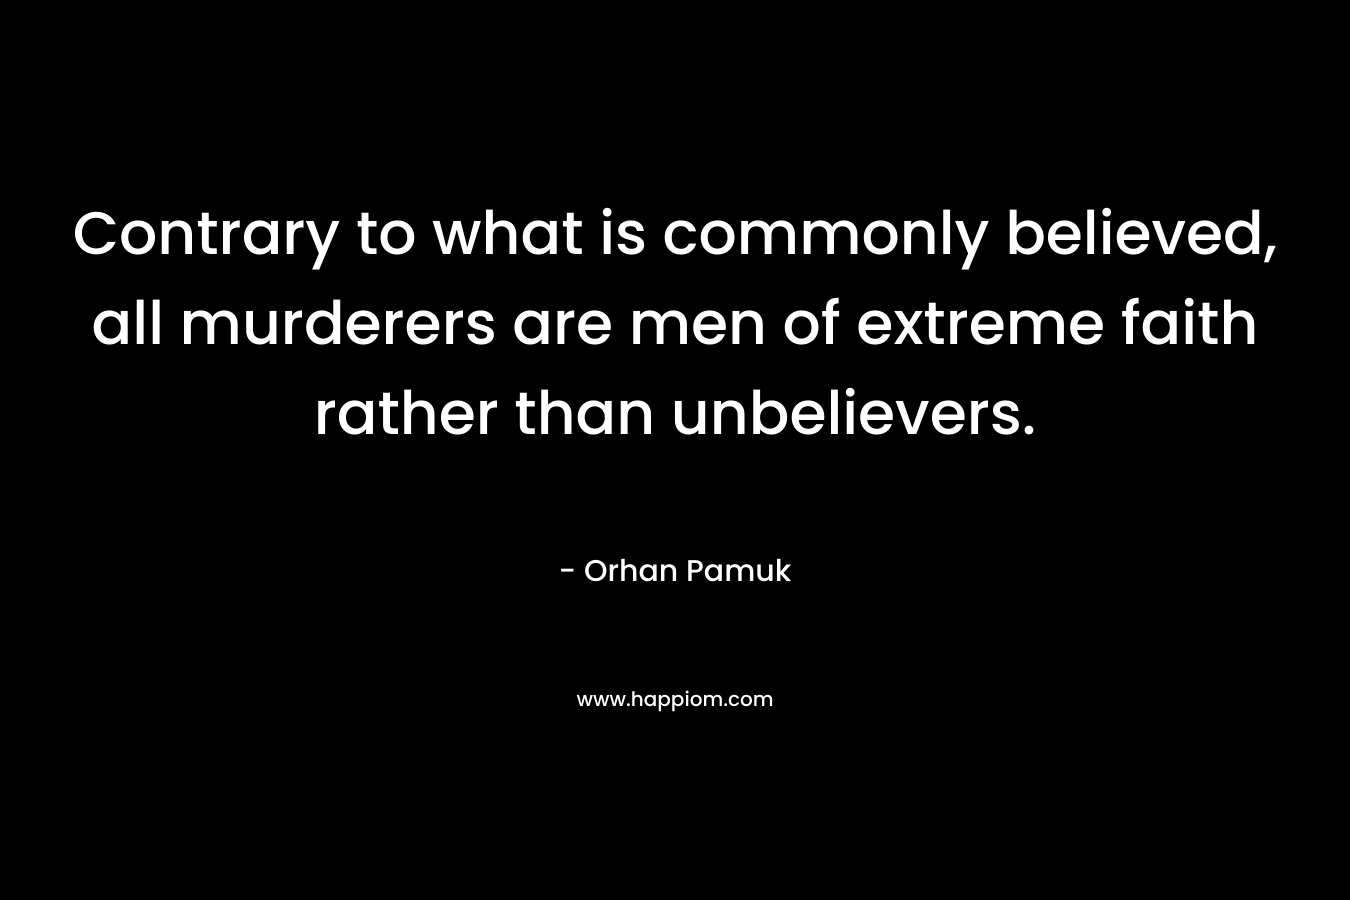 Contrary to what is commonly believed, all murderers are men of extreme faith rather than unbelievers. – Orhan Pamuk